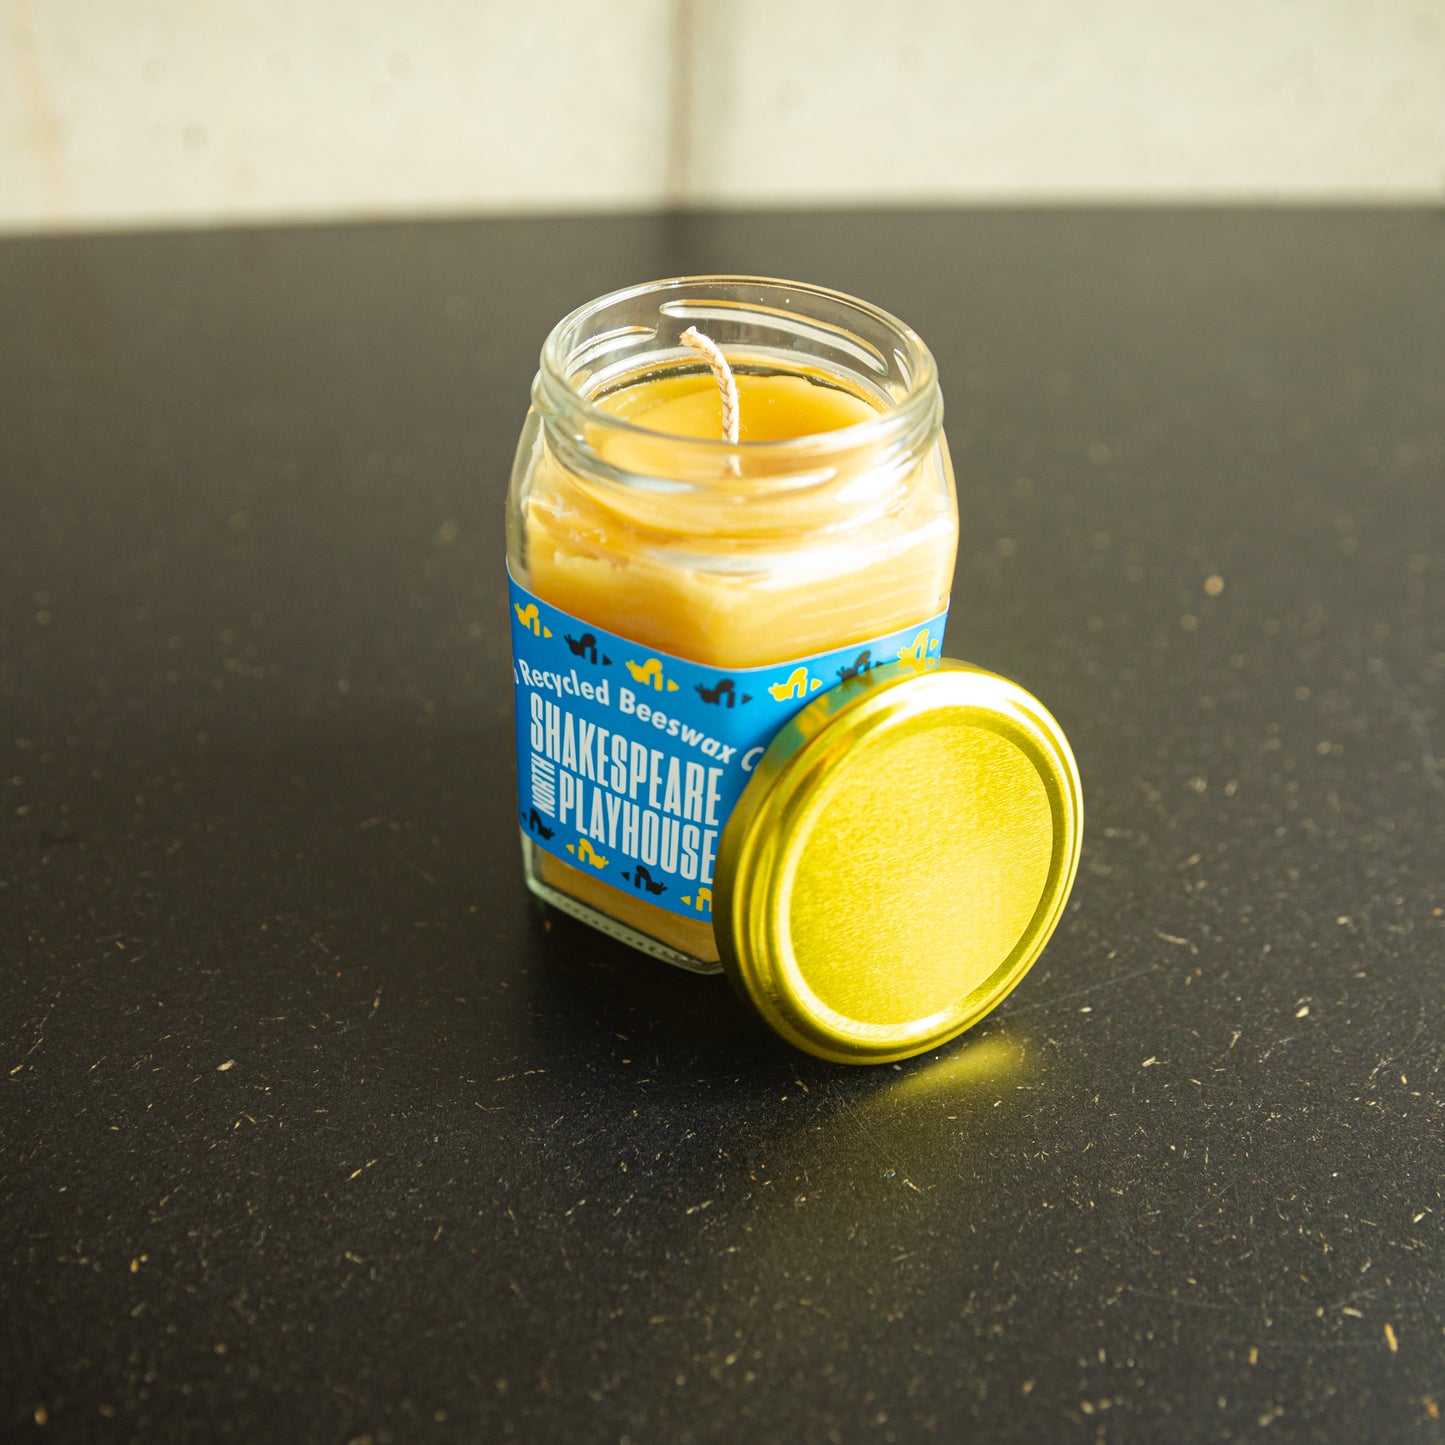 Shakespeare North Playhouse 100% Recycled Beeswax Candle